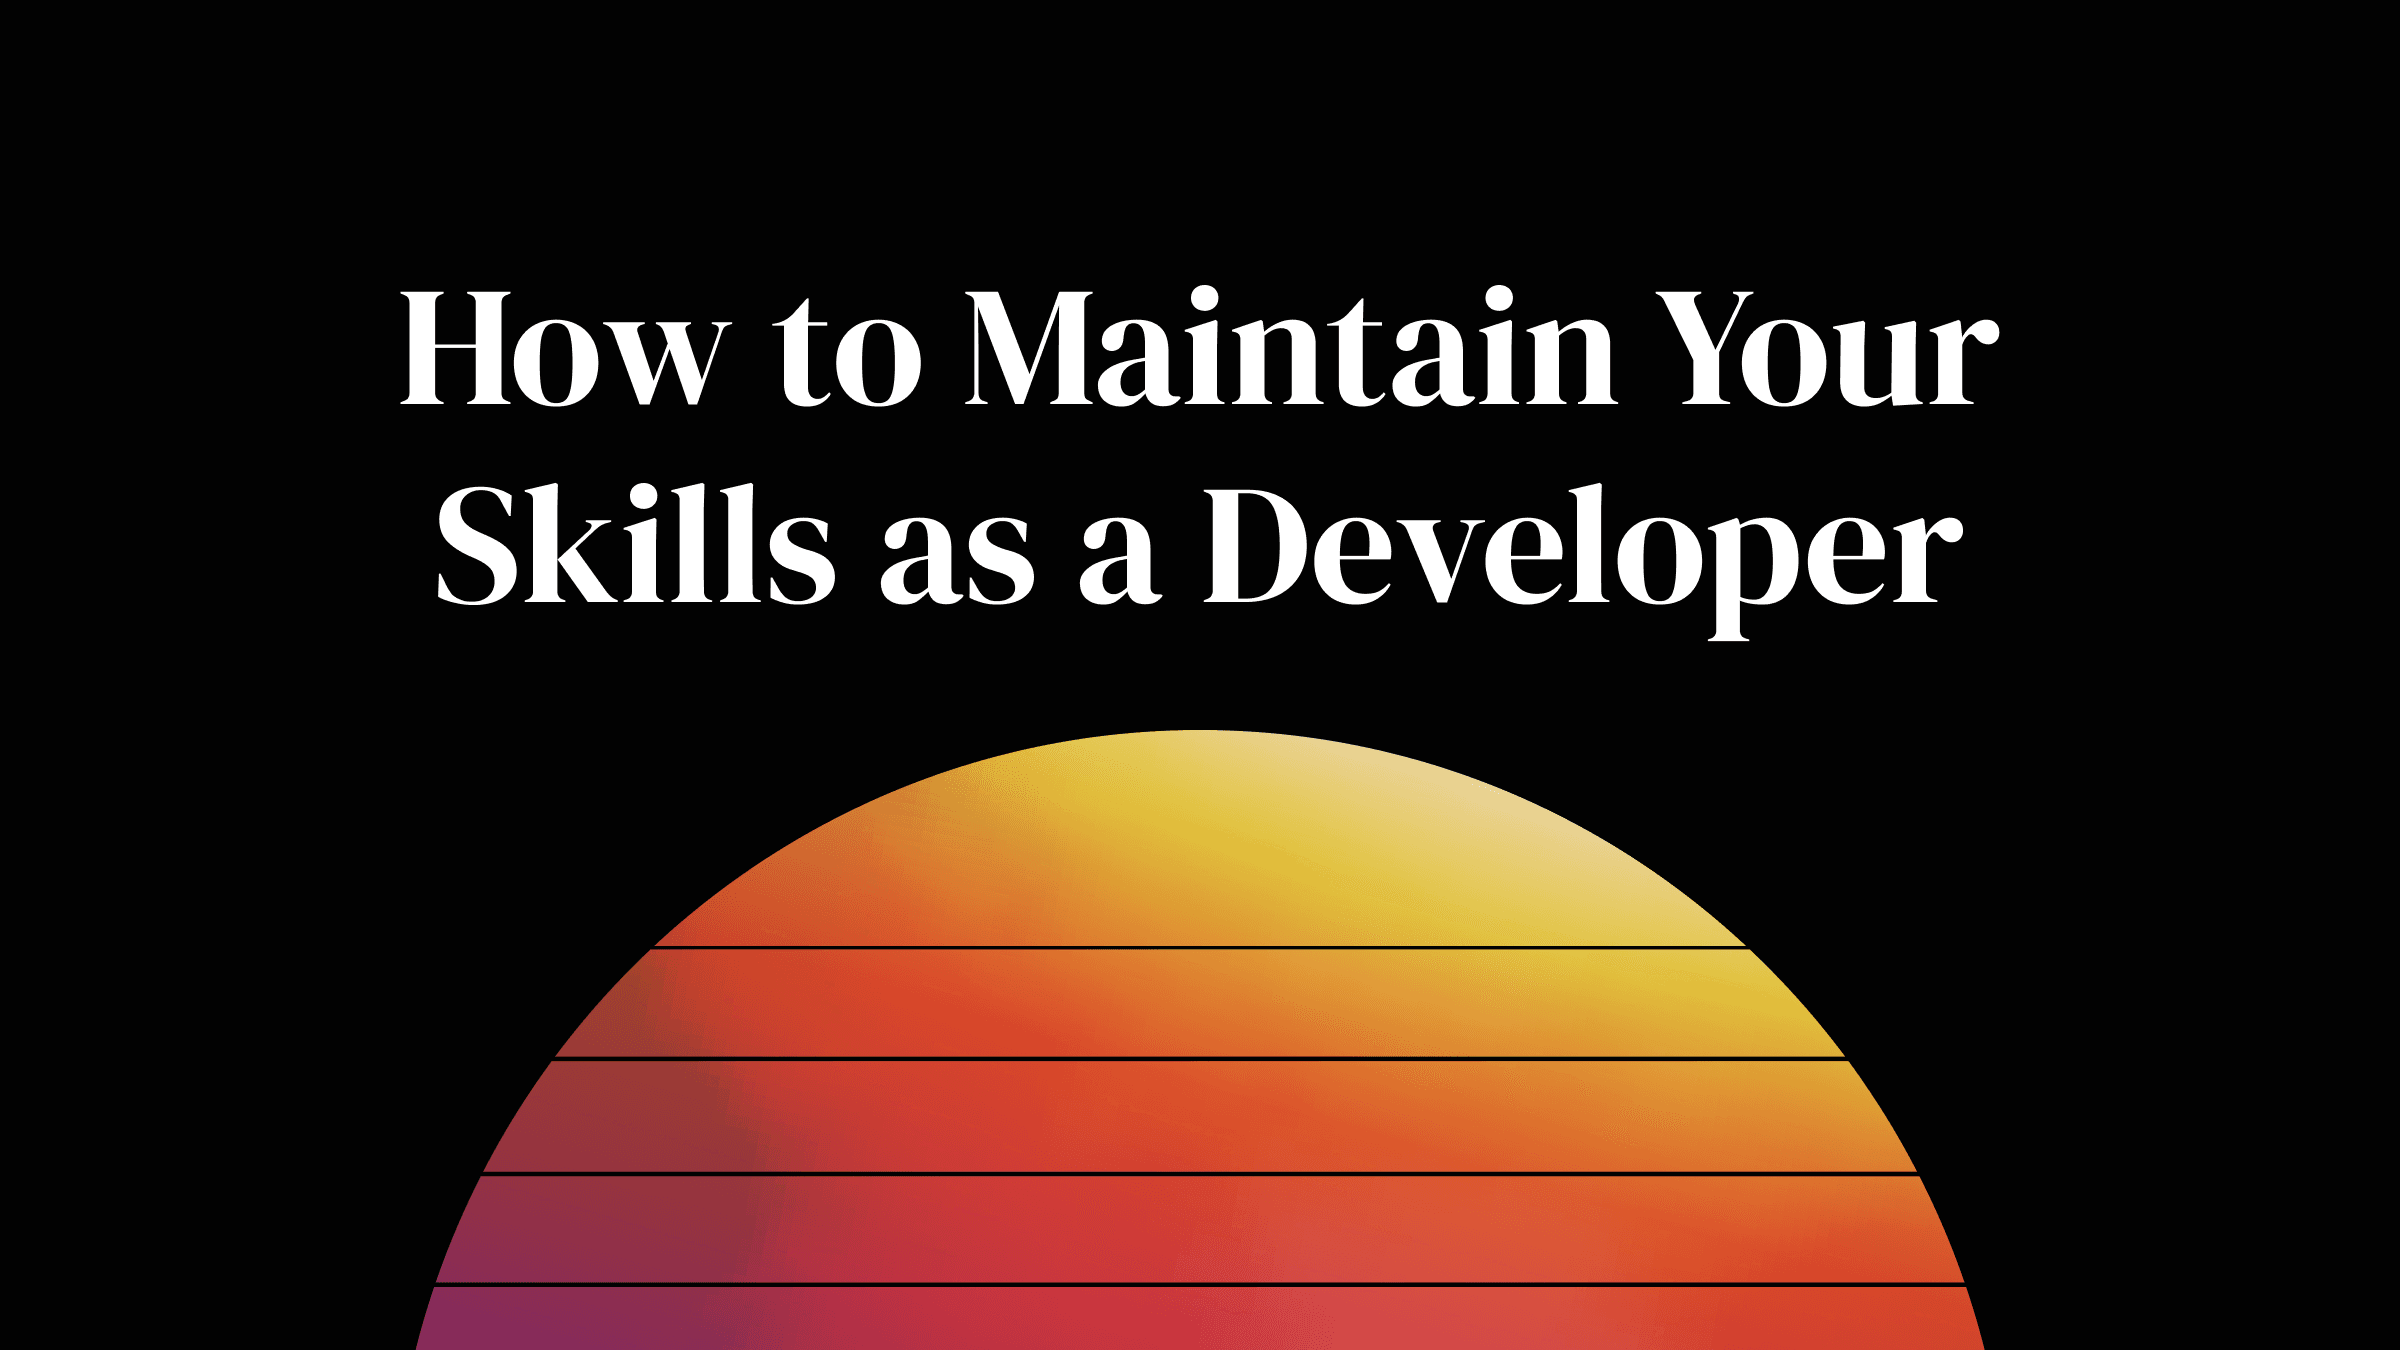 How to Maintain Your Skills as a Developer